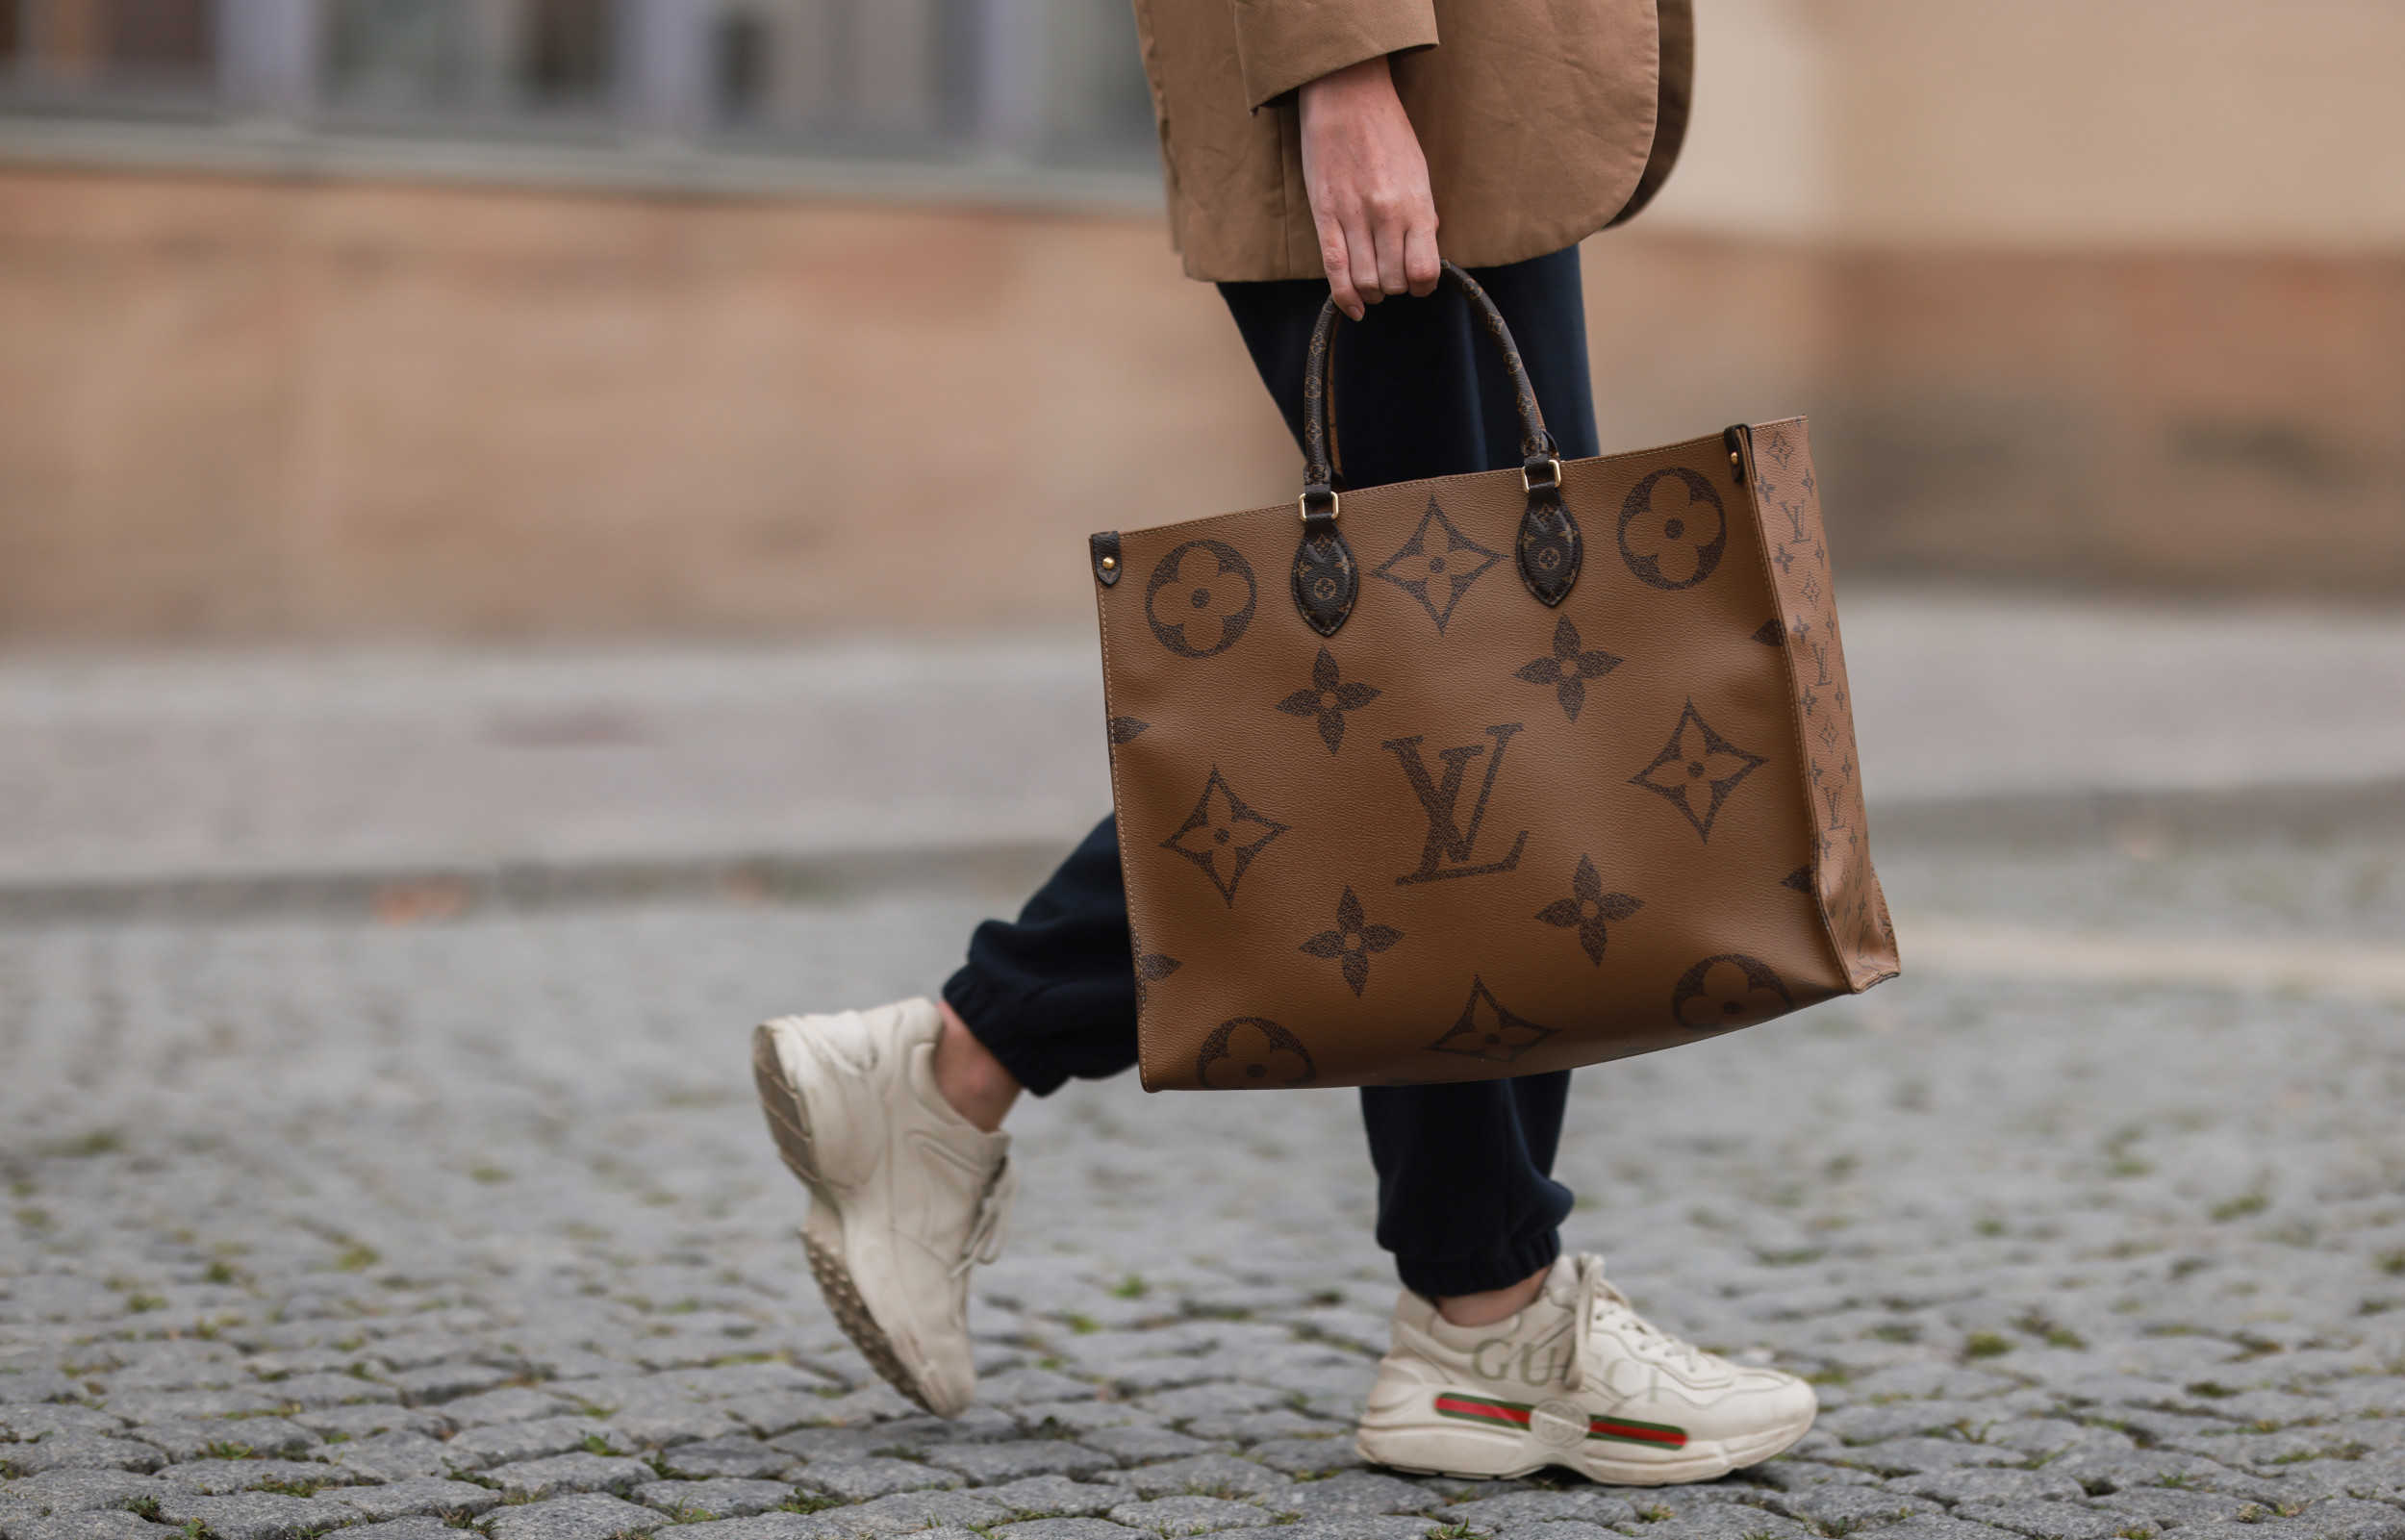 louis vuitton on the go mm vs gm